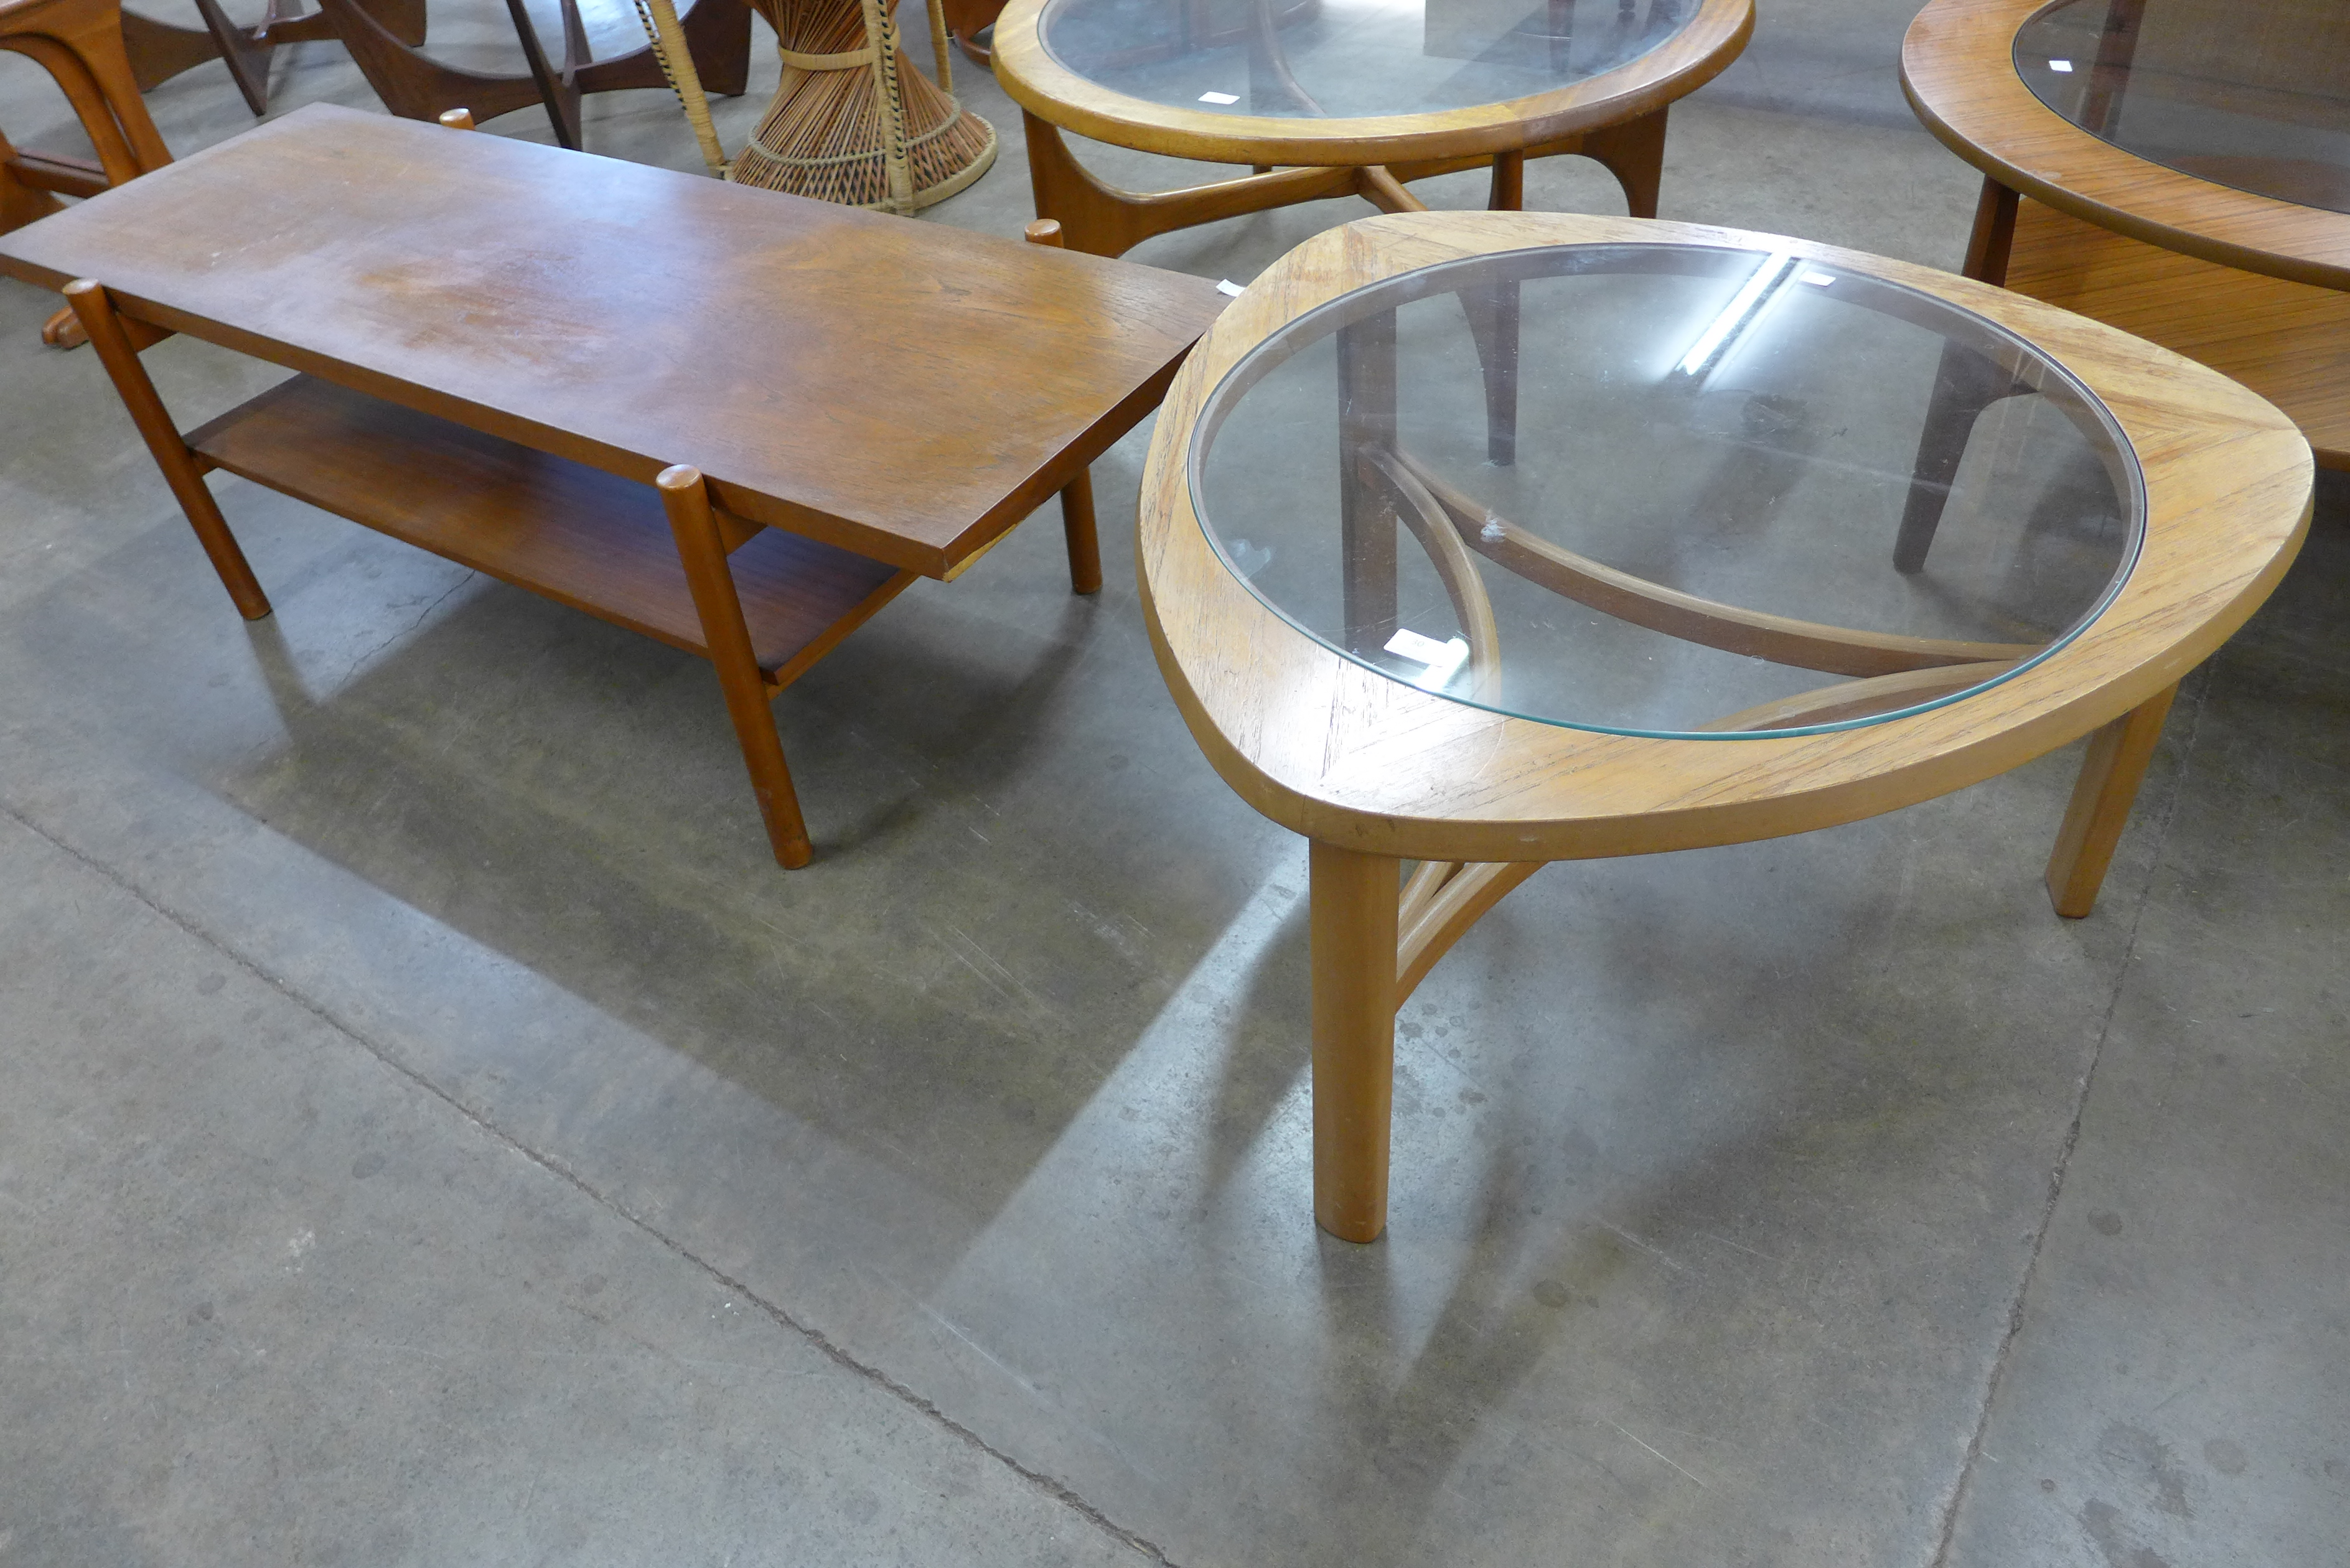 A Nathan teak and glass topped triangular coffee table and a rectangular teak coffee table